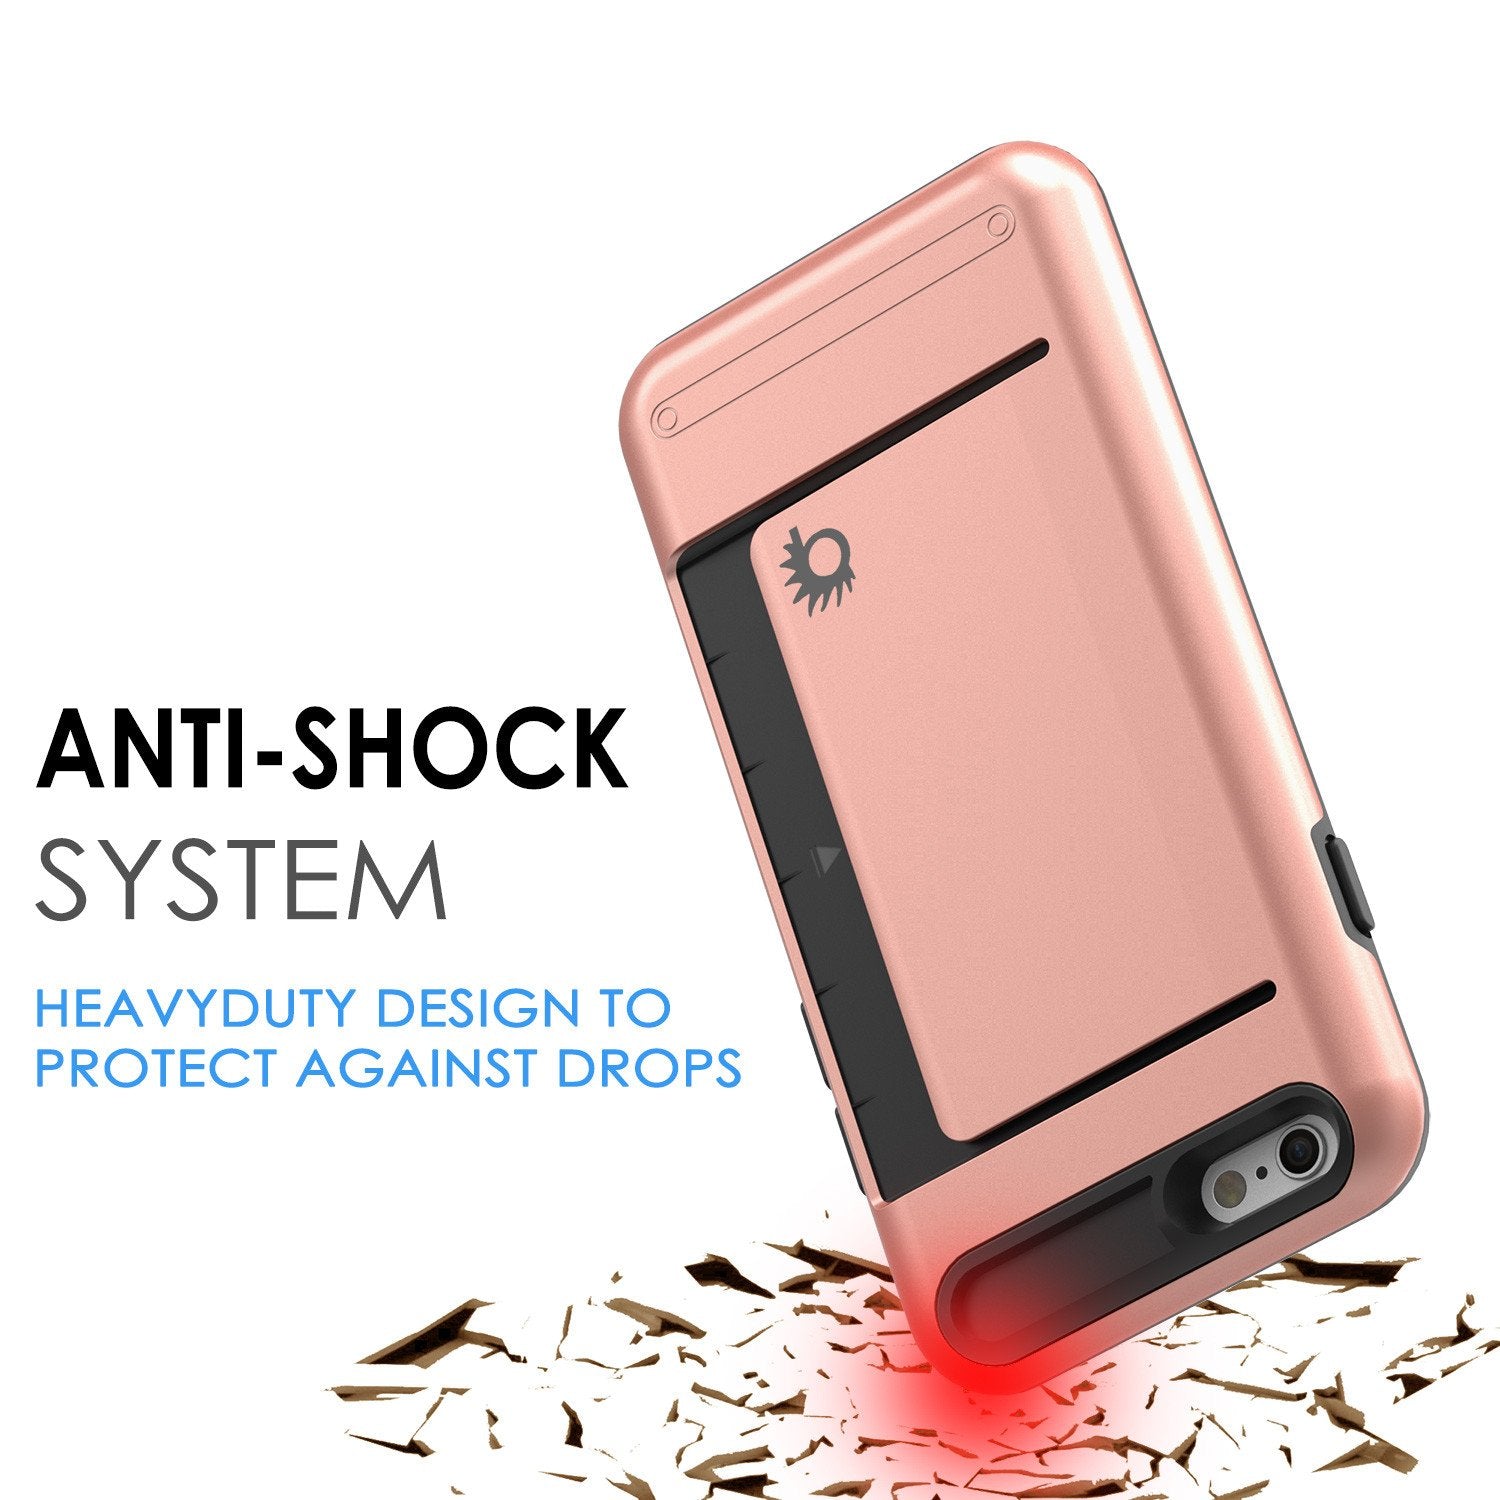 iPhone 6/6s Case PunkCase CLUTCH Rose Gold Series Slim Armor Soft Cover Case w/ Tempered Glass